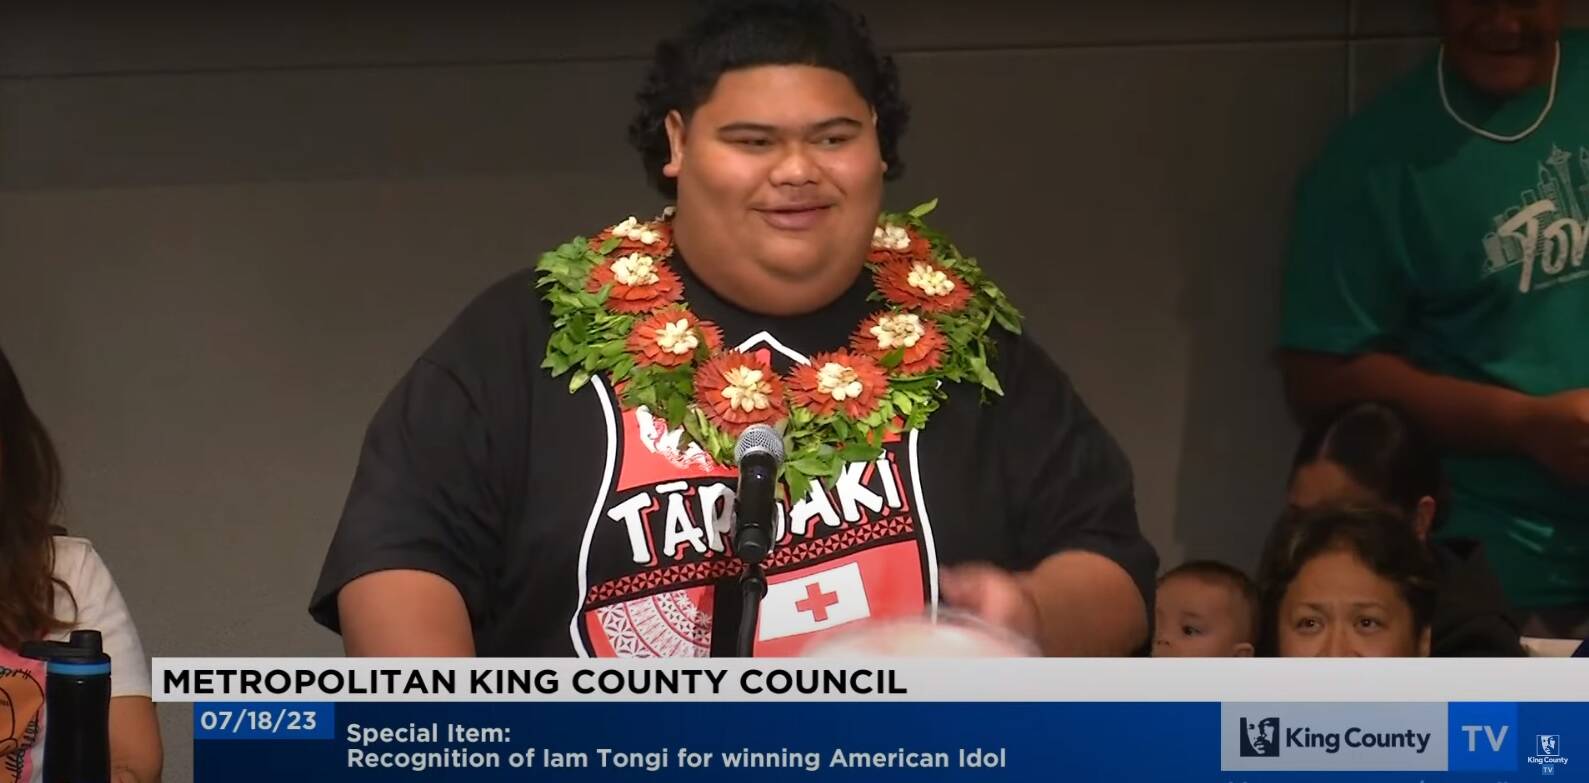 Iam Tongi was honored July 18 during the Metropolitan King County Council meeting. Screengrab from video of the meeting.